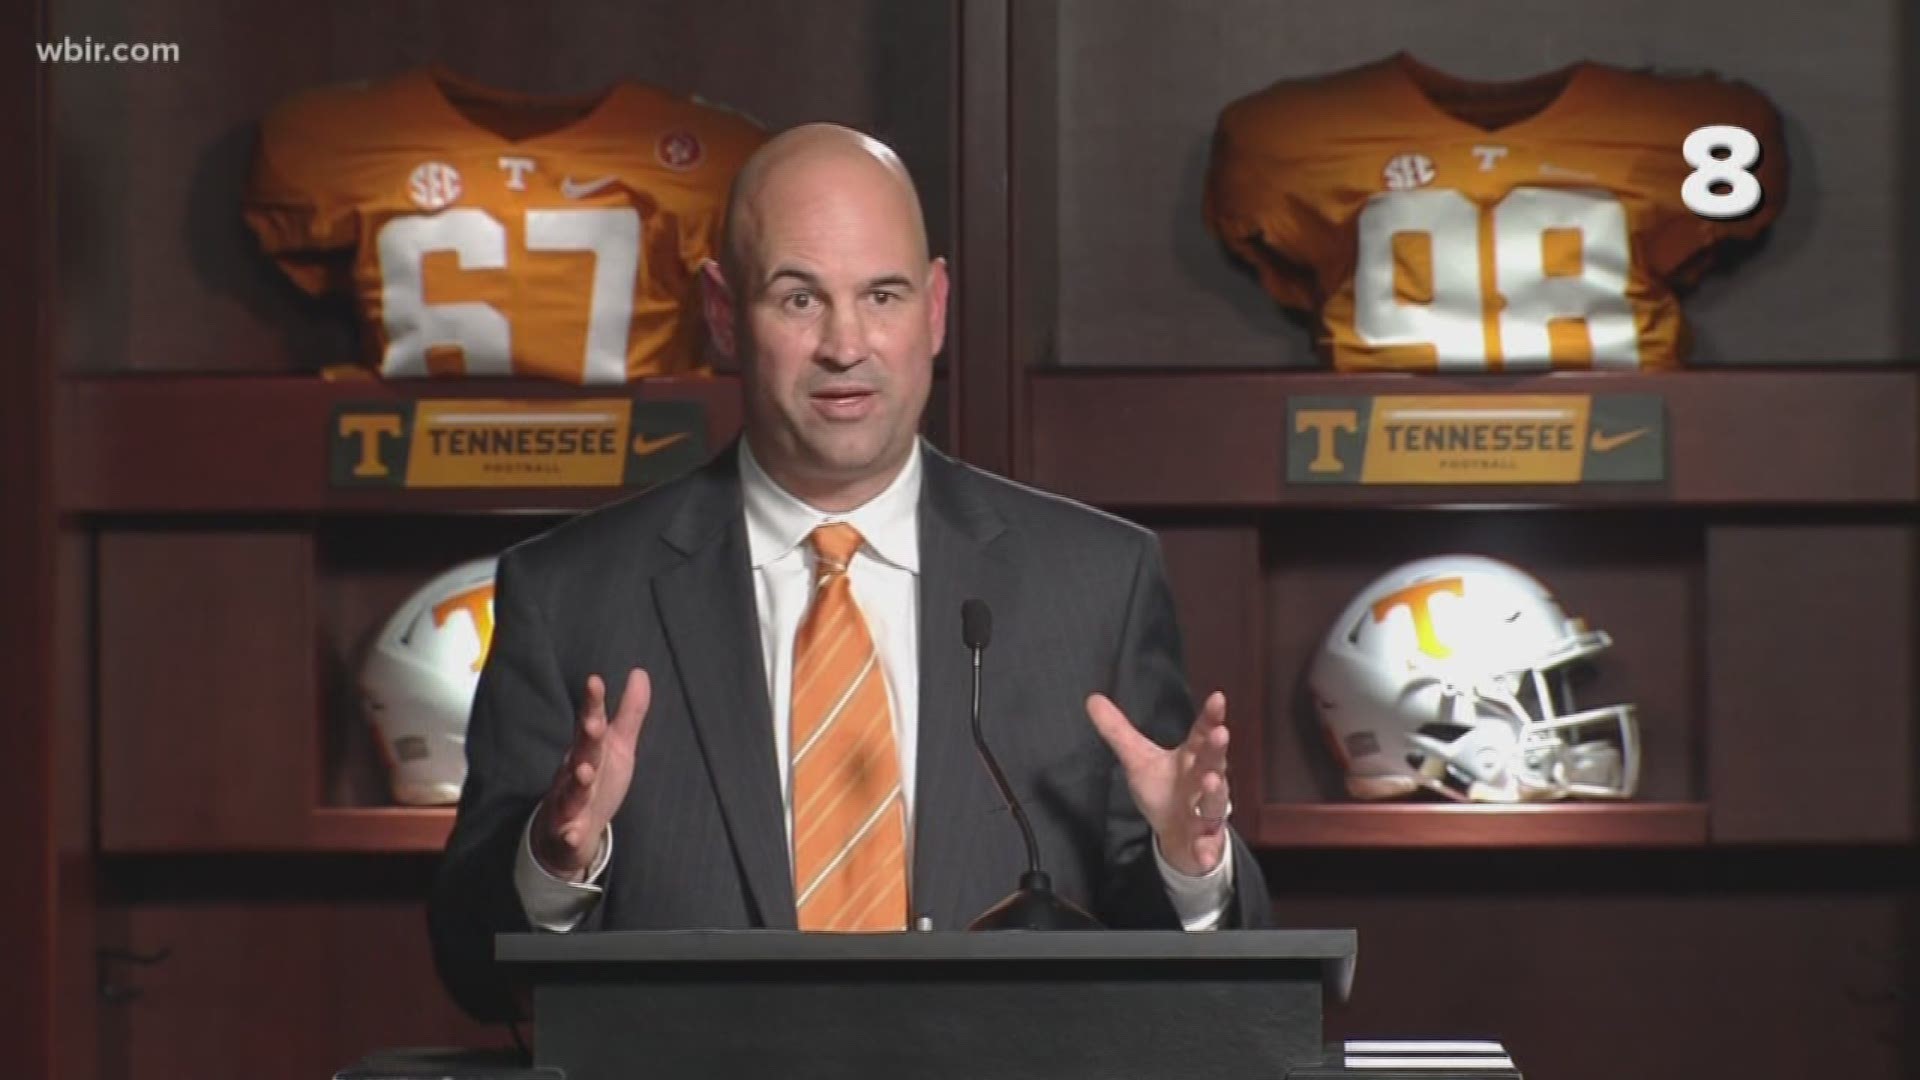 One word kept popping up during UT Coach Jeremy Pruitt's introductory news conference. Aight? Dec. 8, 2017.